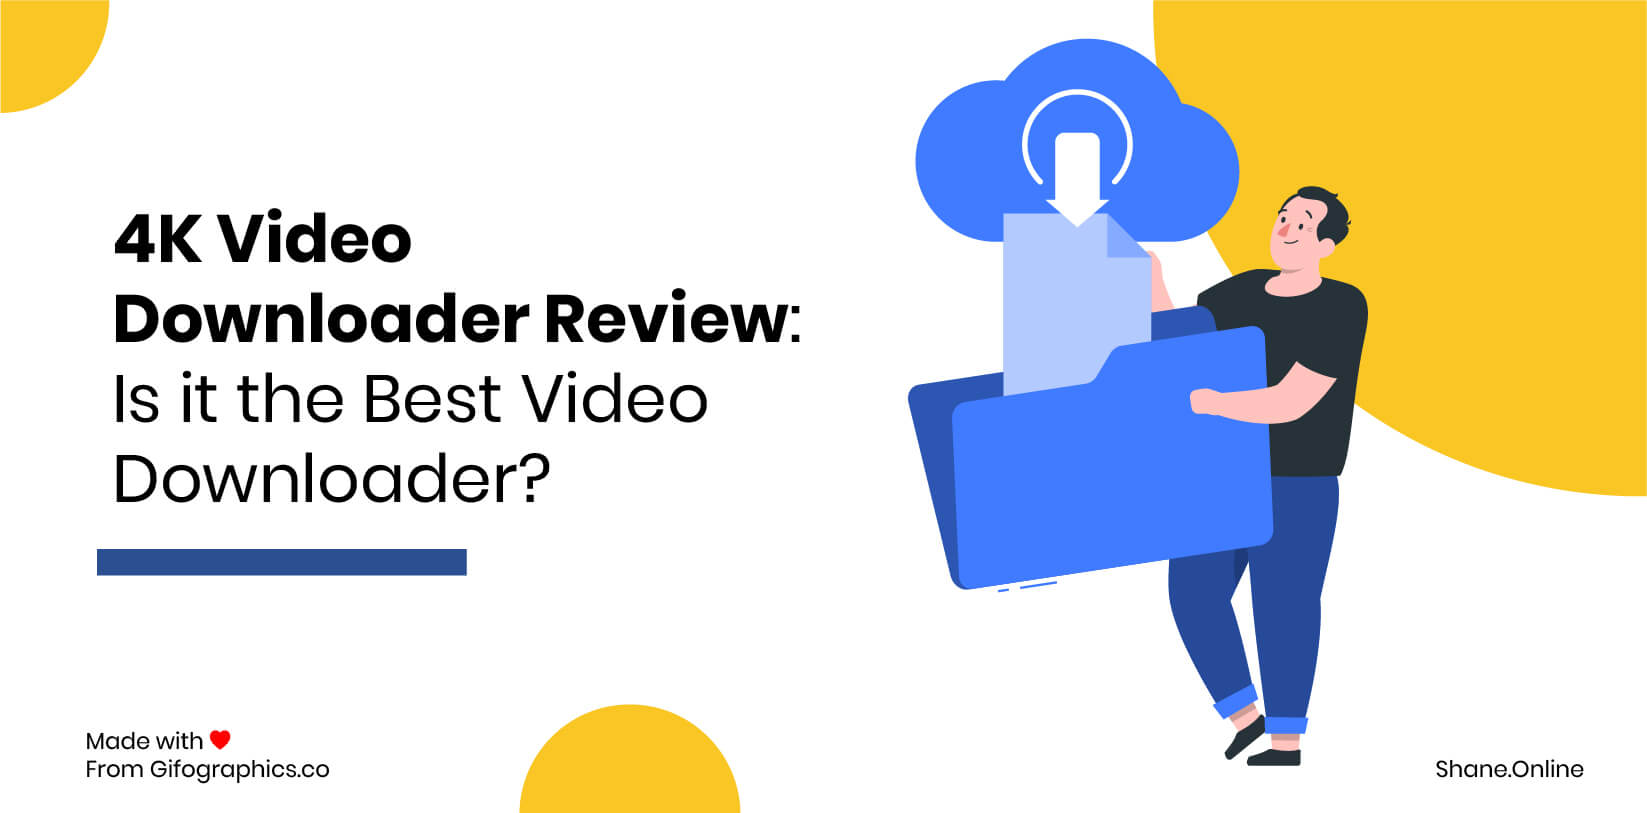 4K Video Downloader Review- Is it the Best Video Downloader